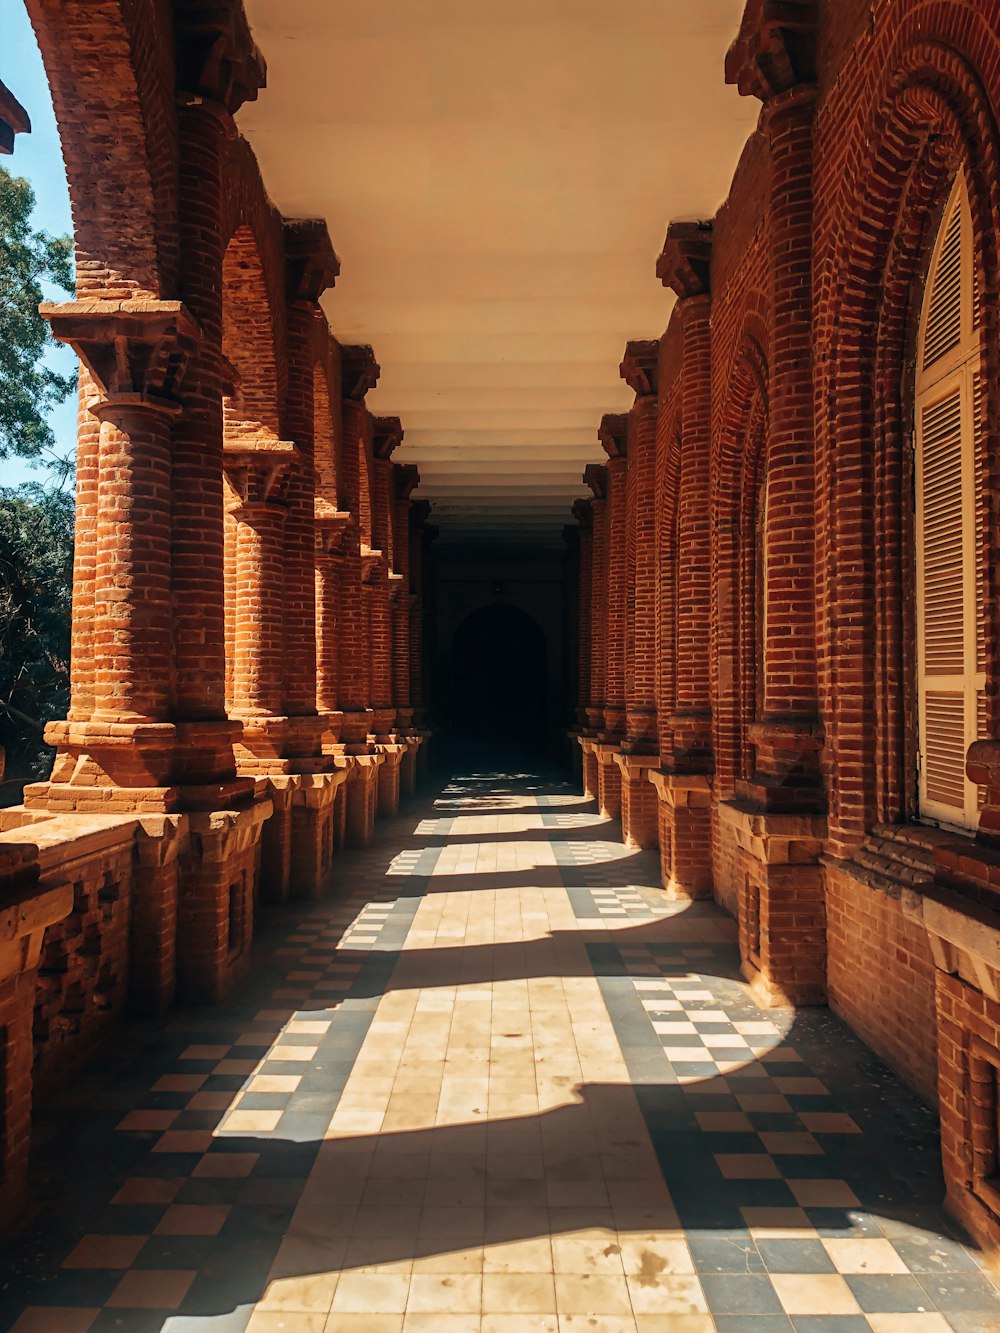 a long hallway lined with brick pillars and windows